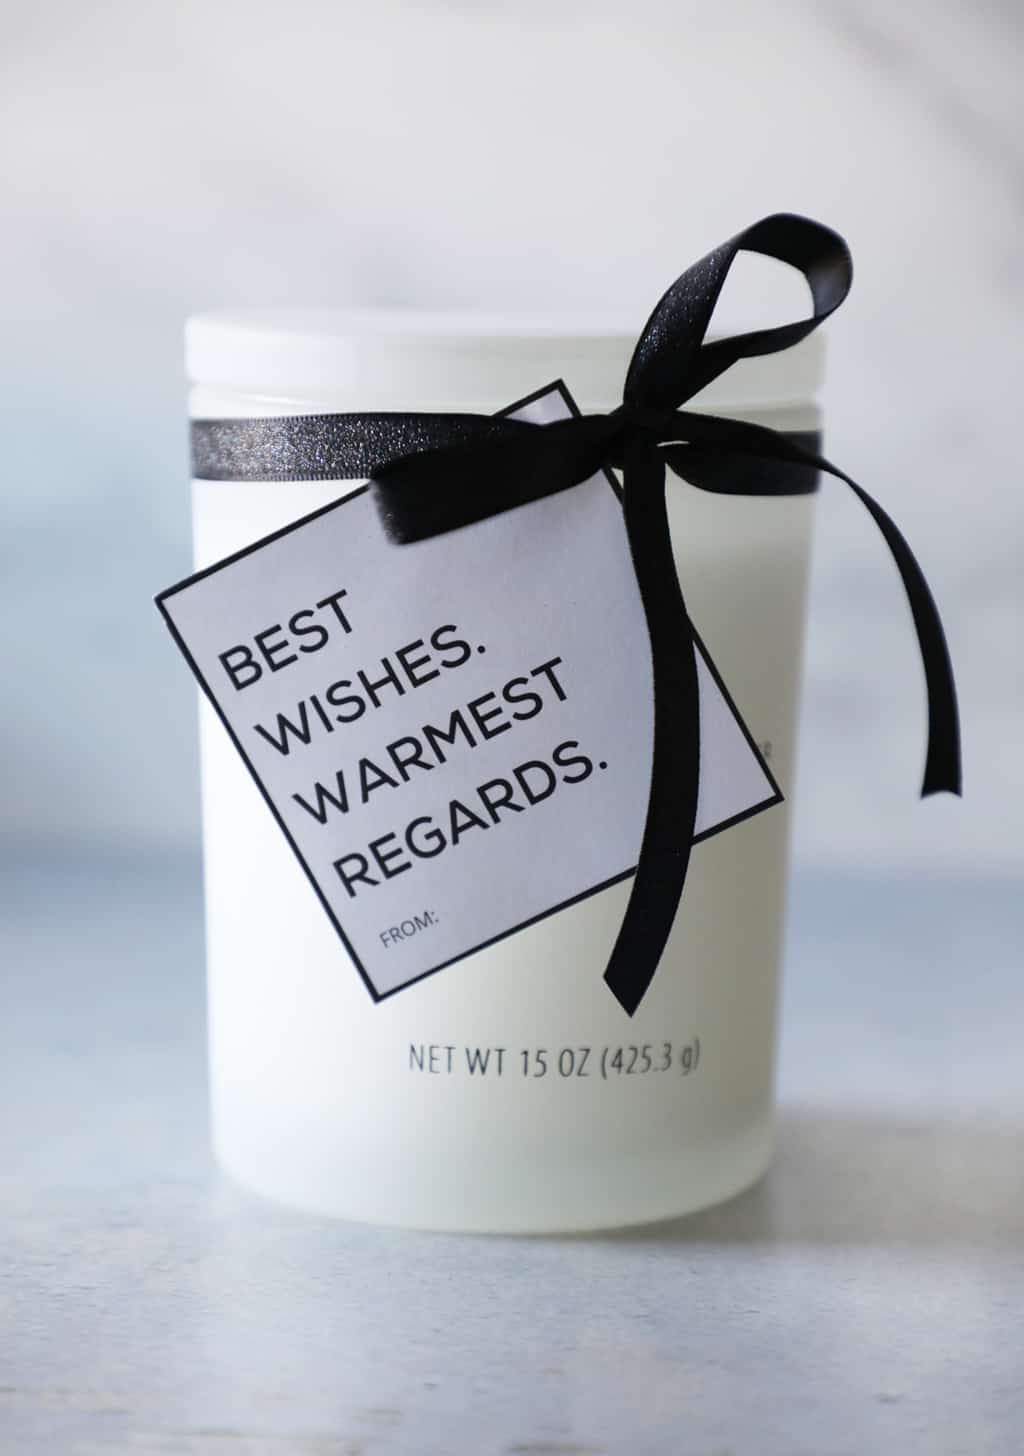 warmest wishes best regards gift tag on a white candle